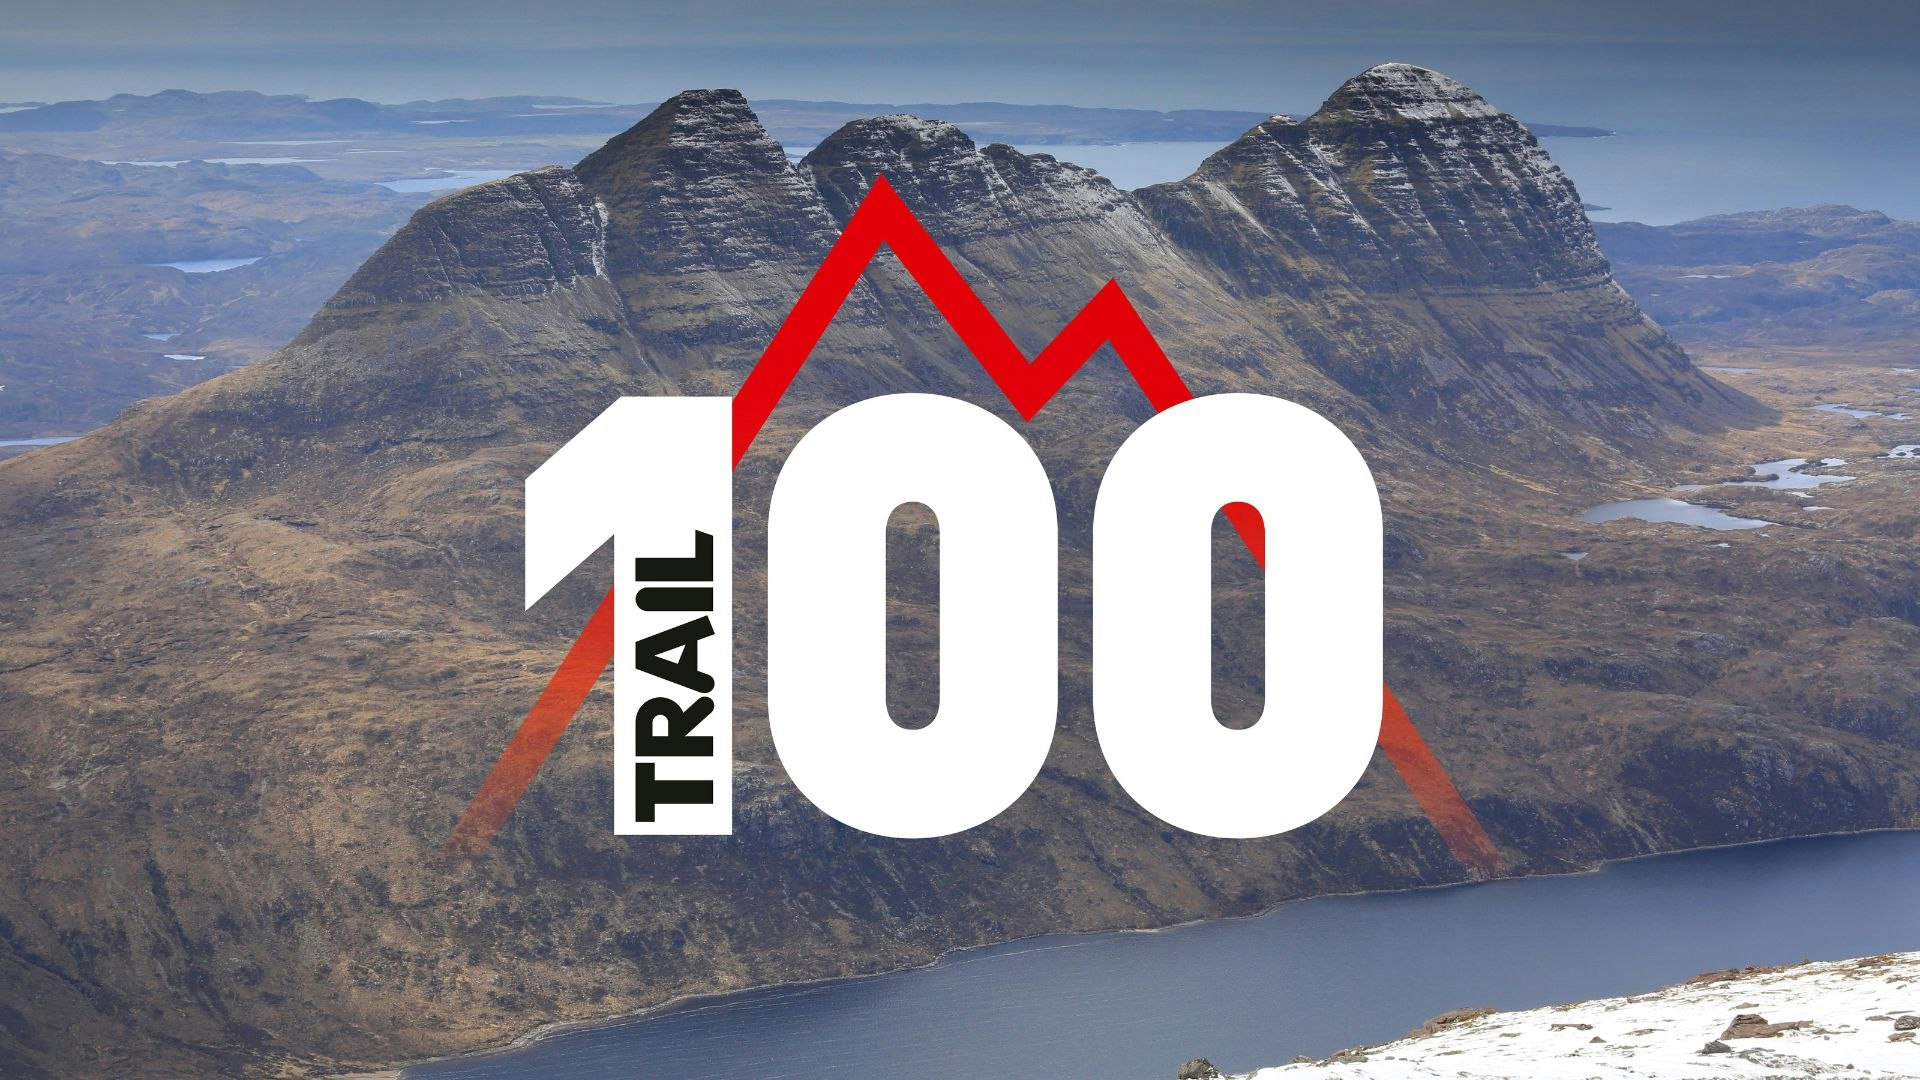 The Trail 100 challenge